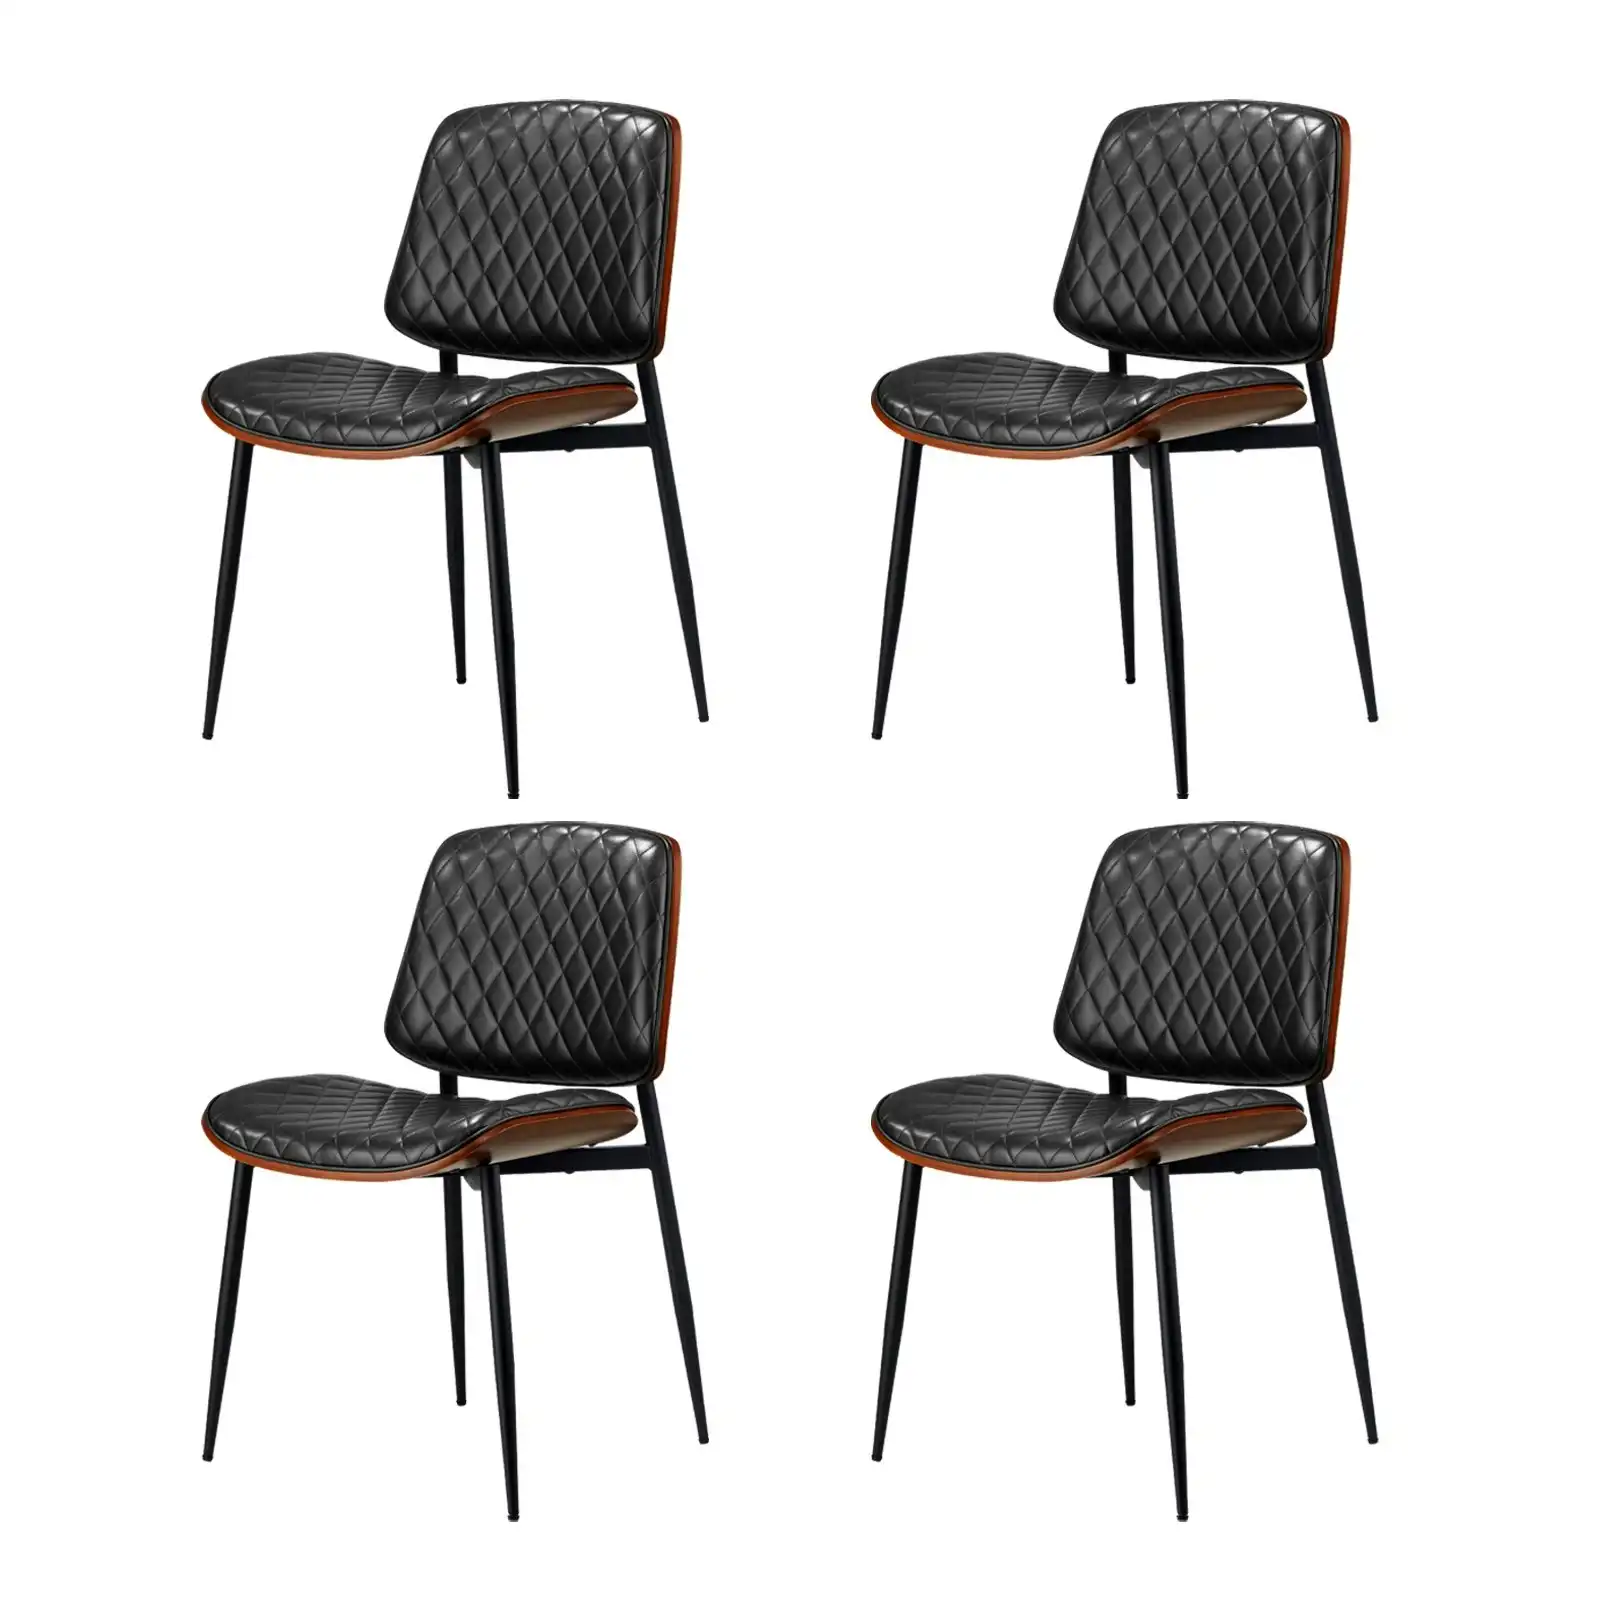 Oikiture 4x Dining Chairs Retro Faux Leather Solid Beech Wood Metal Legs Black